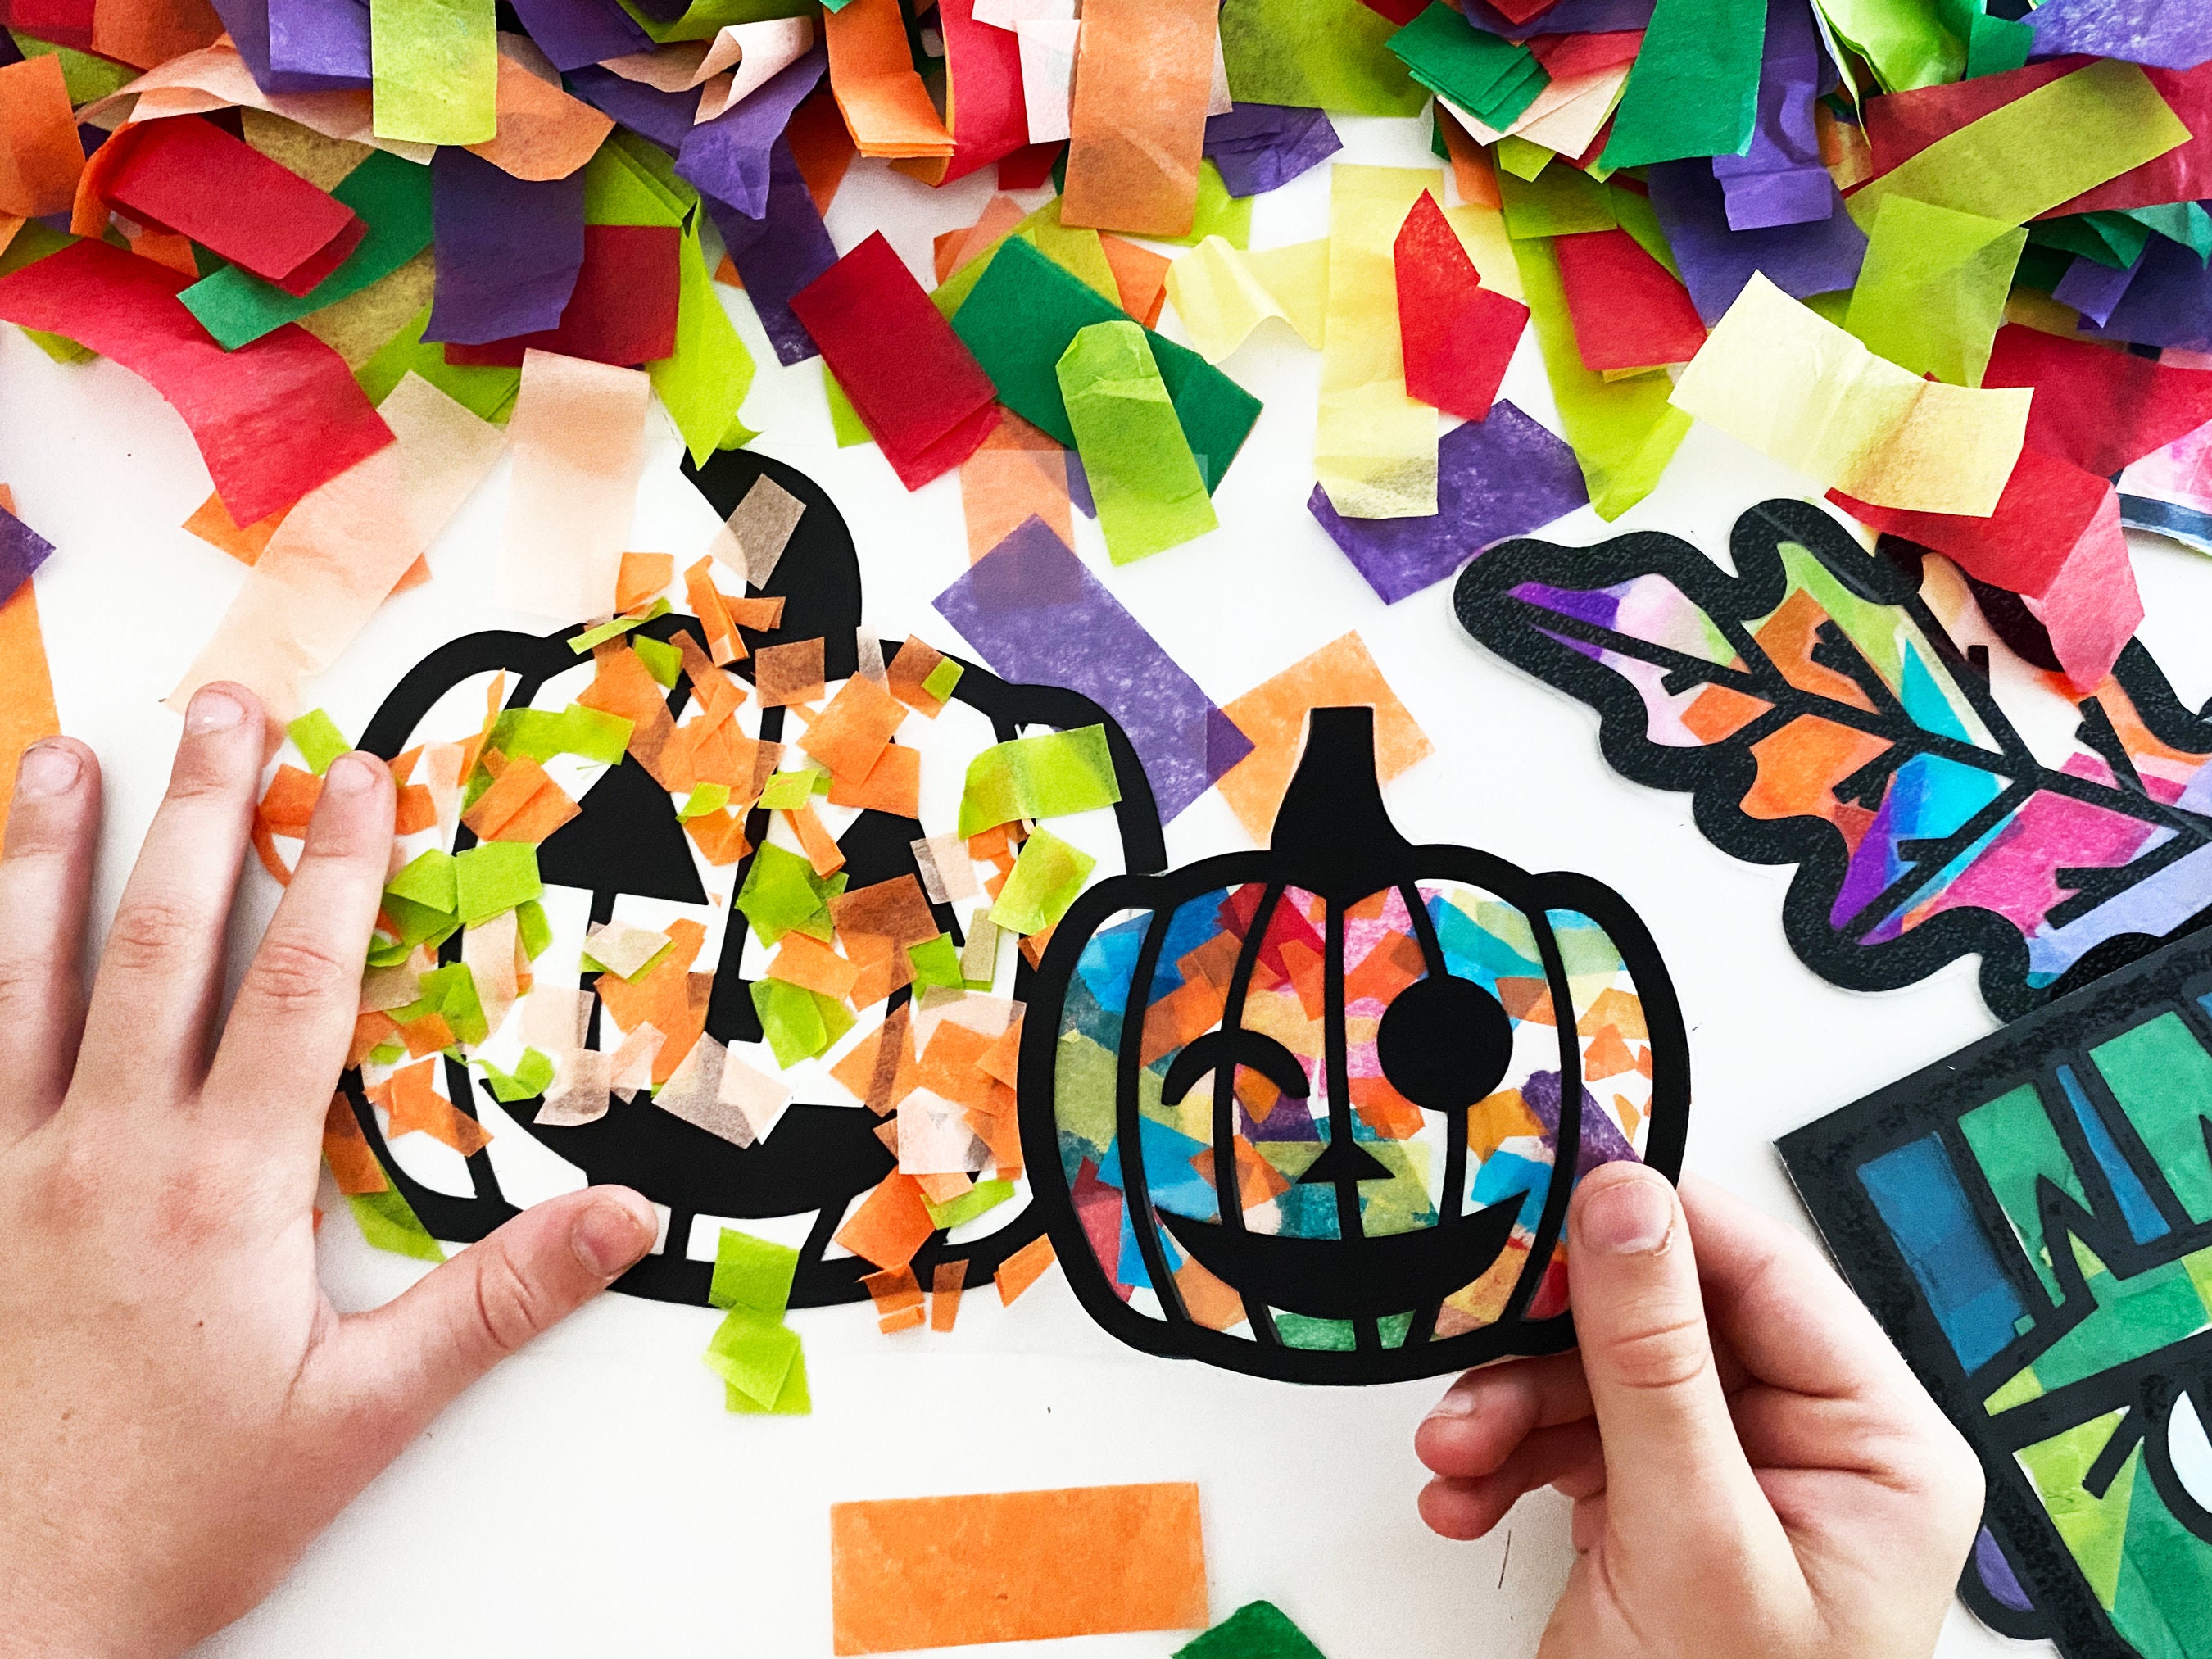 Halloween Party Activity for Toddlers and Kids Classroom Fall